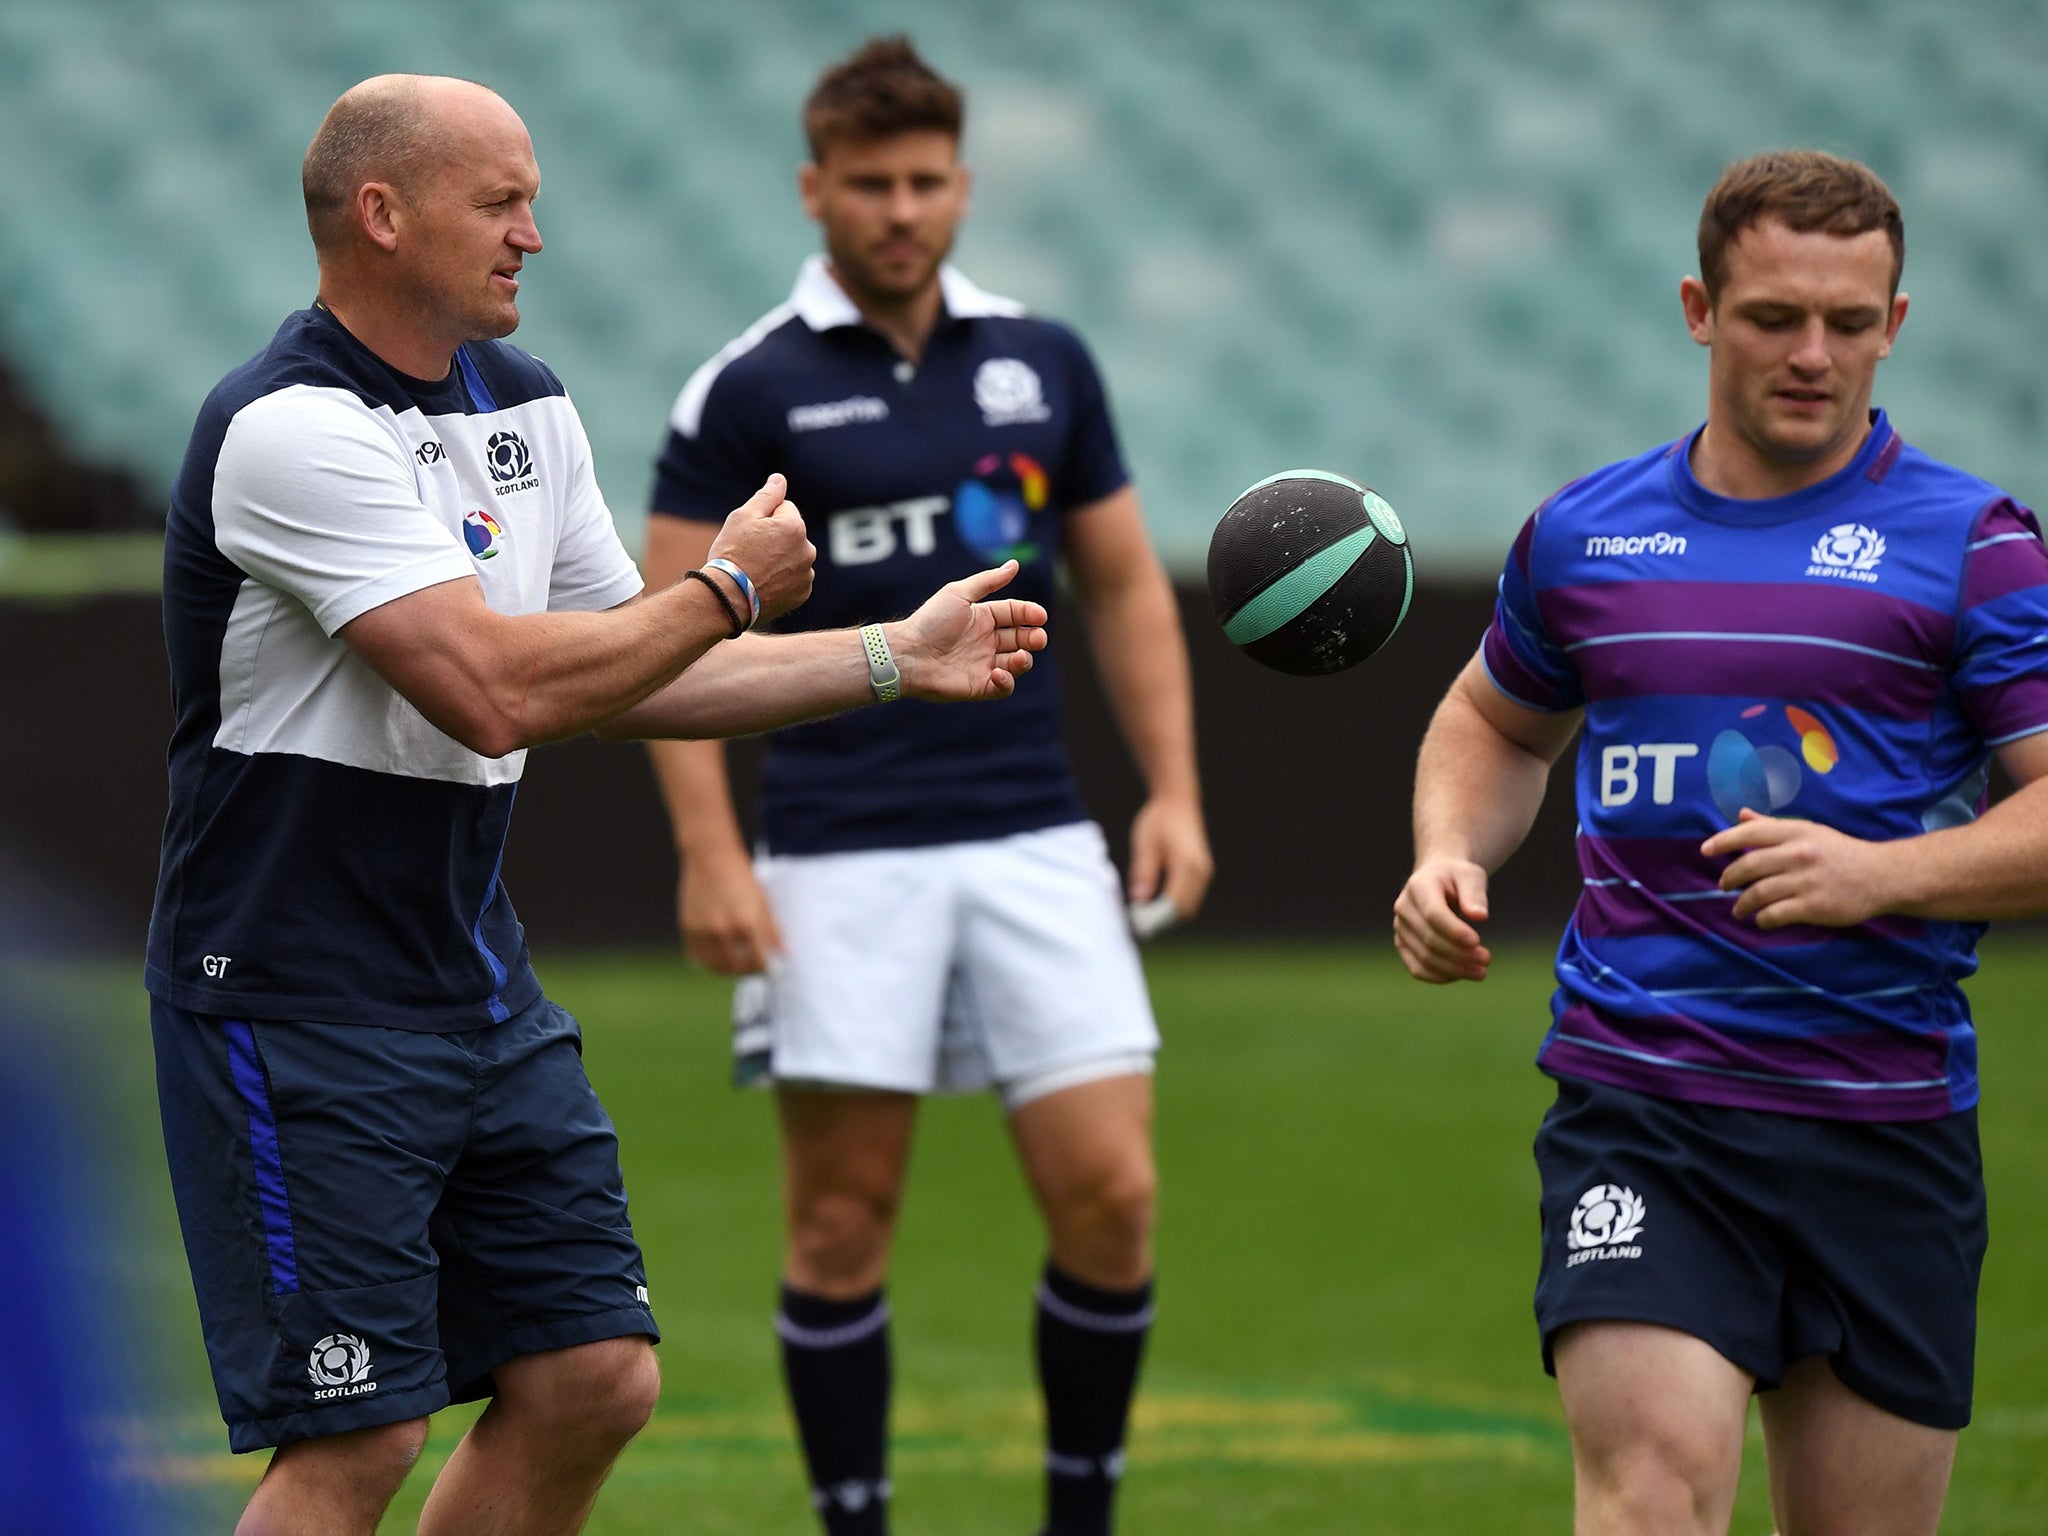 Gregor Townsend will take charge of his first autumn international campaign